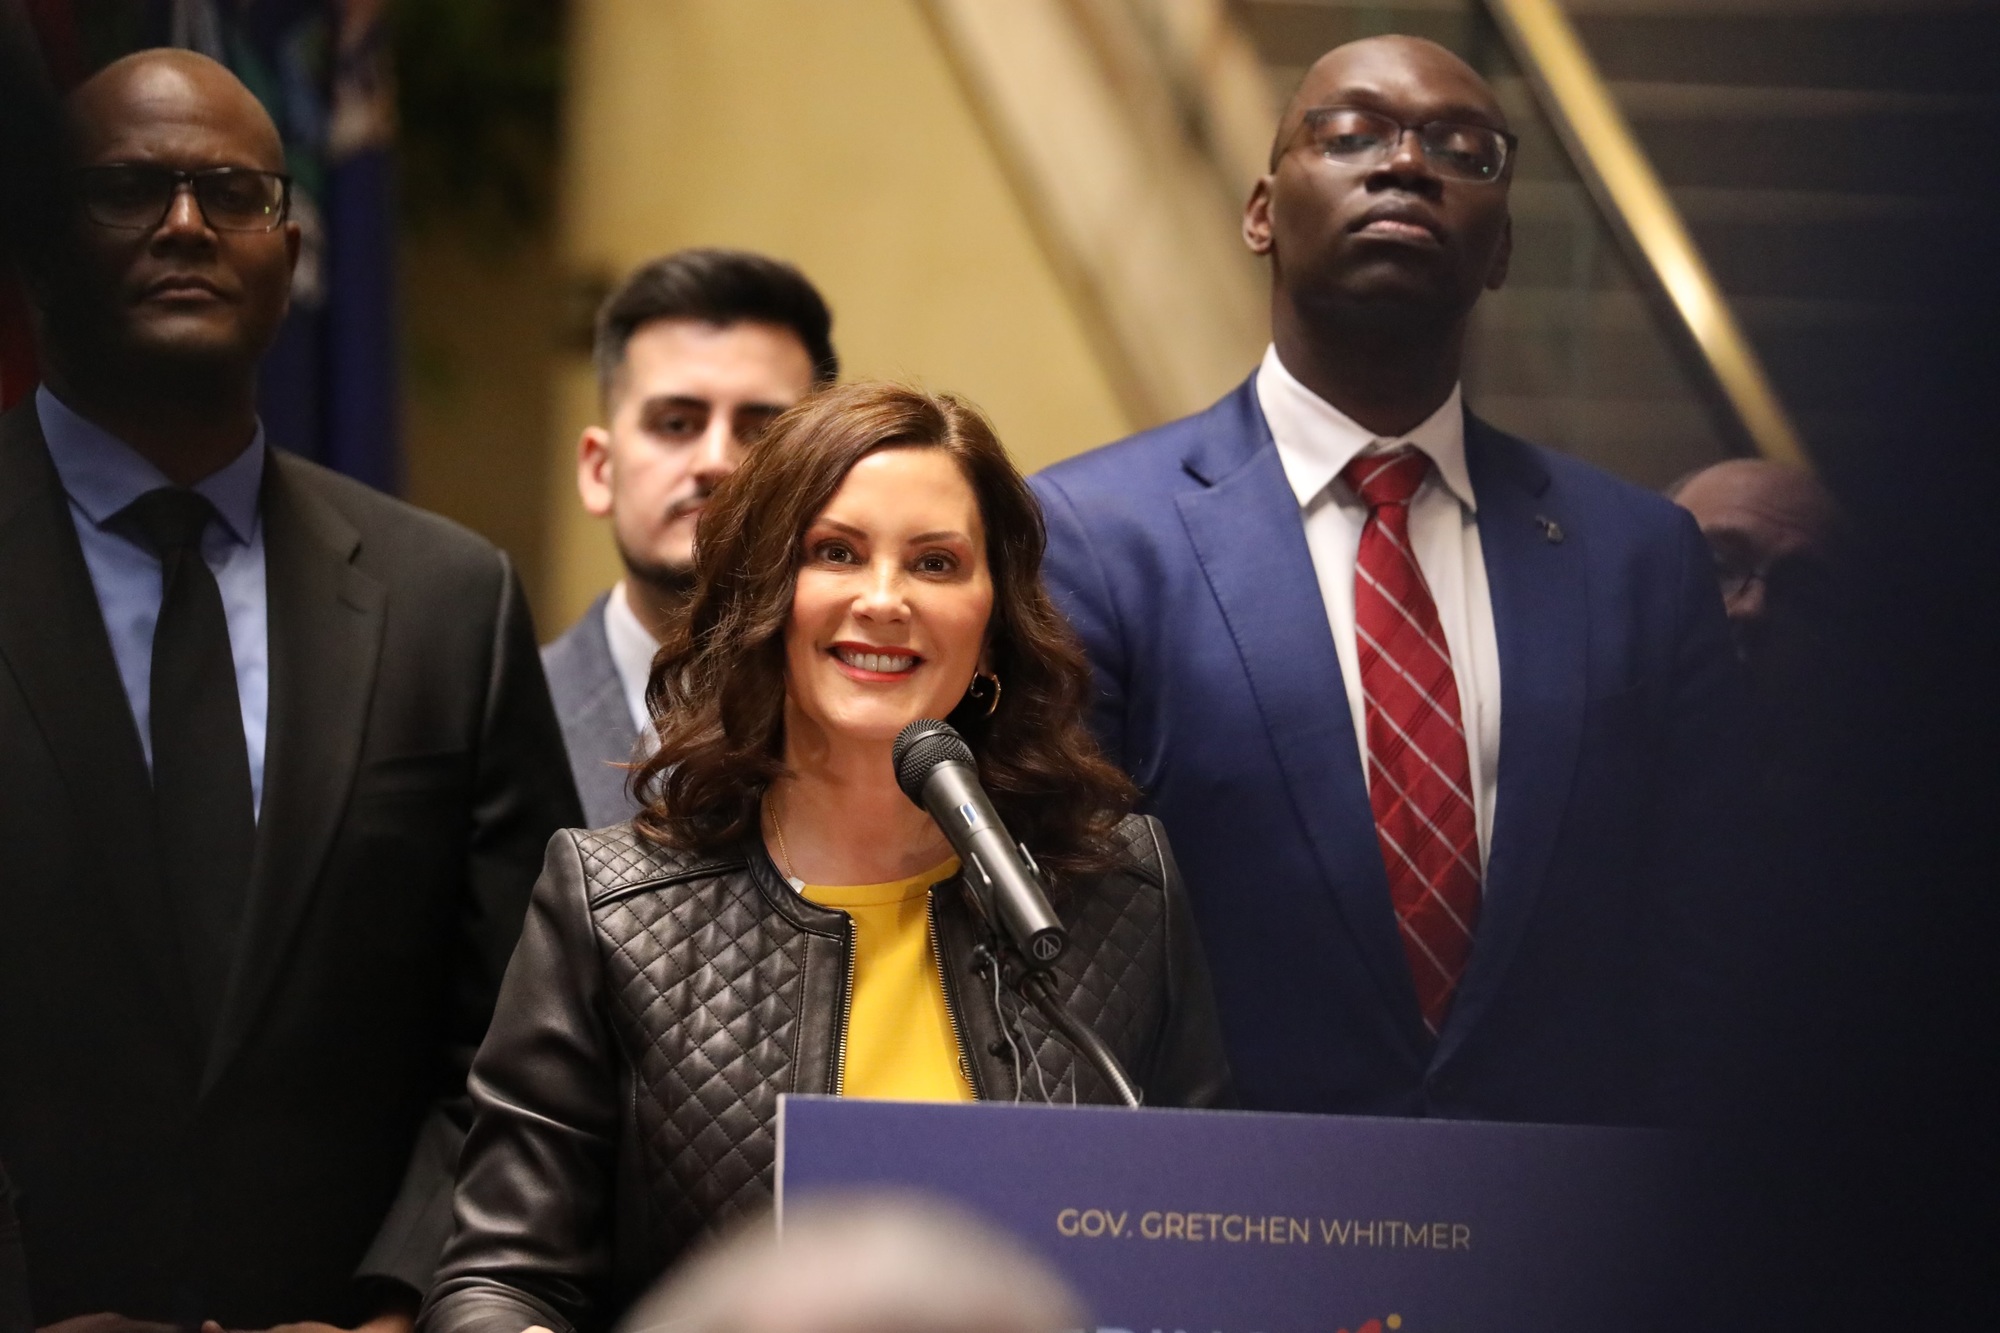 Governor Gretchen Whitmer speaking at podium with a crowd of elected officials and Michiganders standing behind them